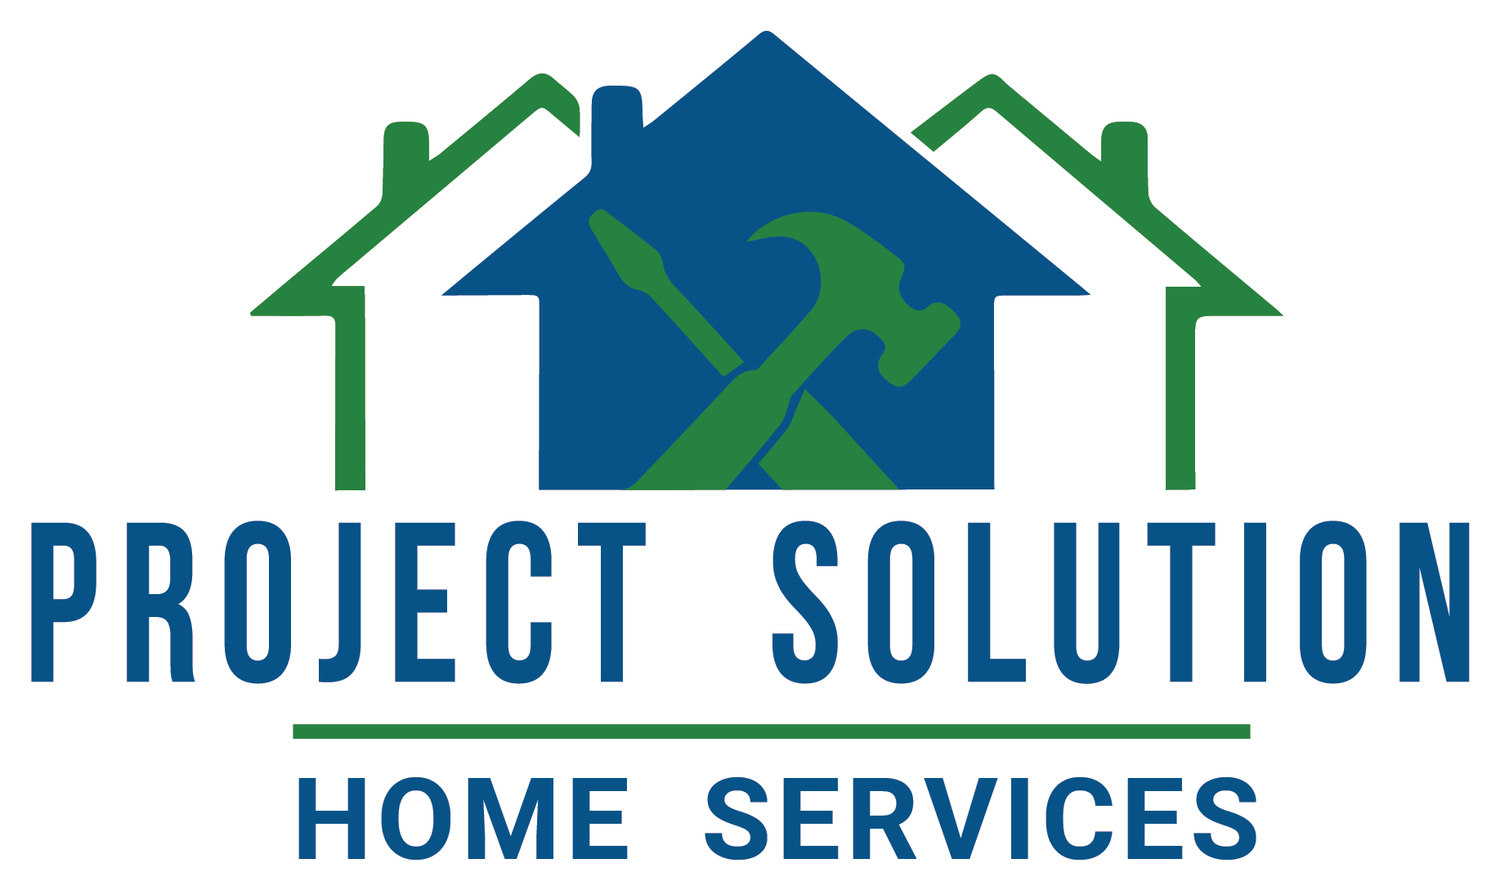 Project Solution Home Services